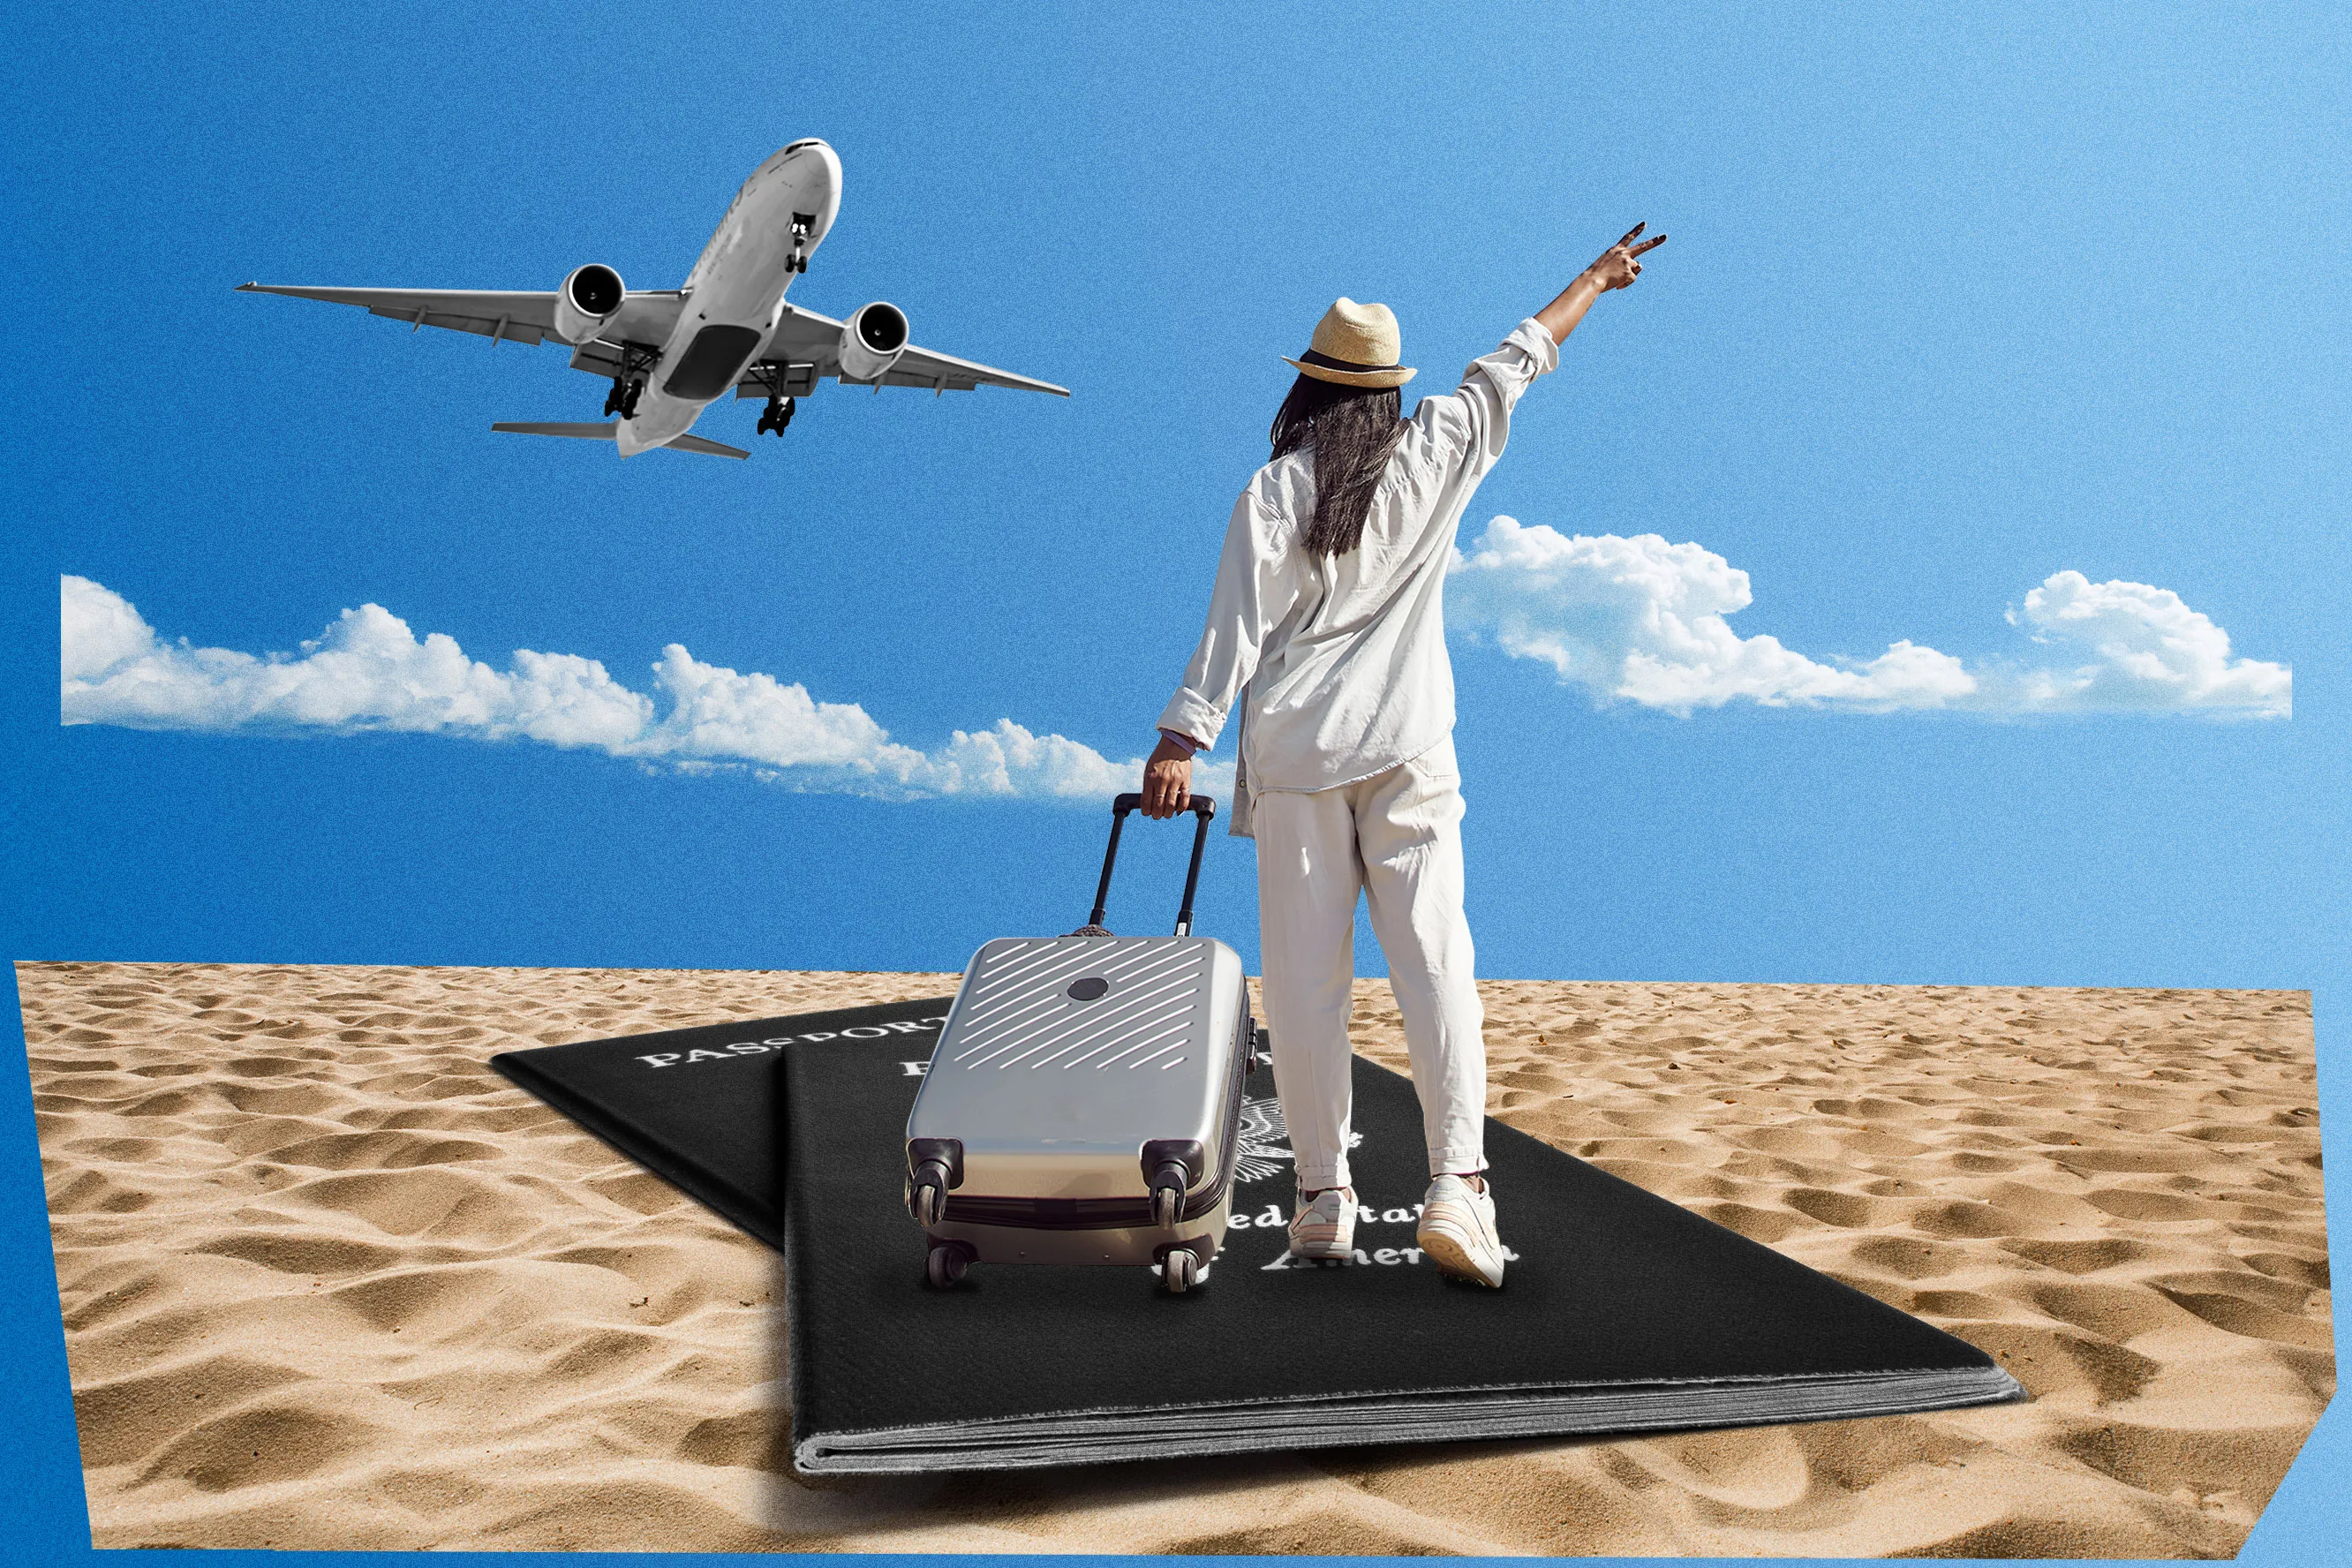 5 Easy Ways to Save on Travel This Summer